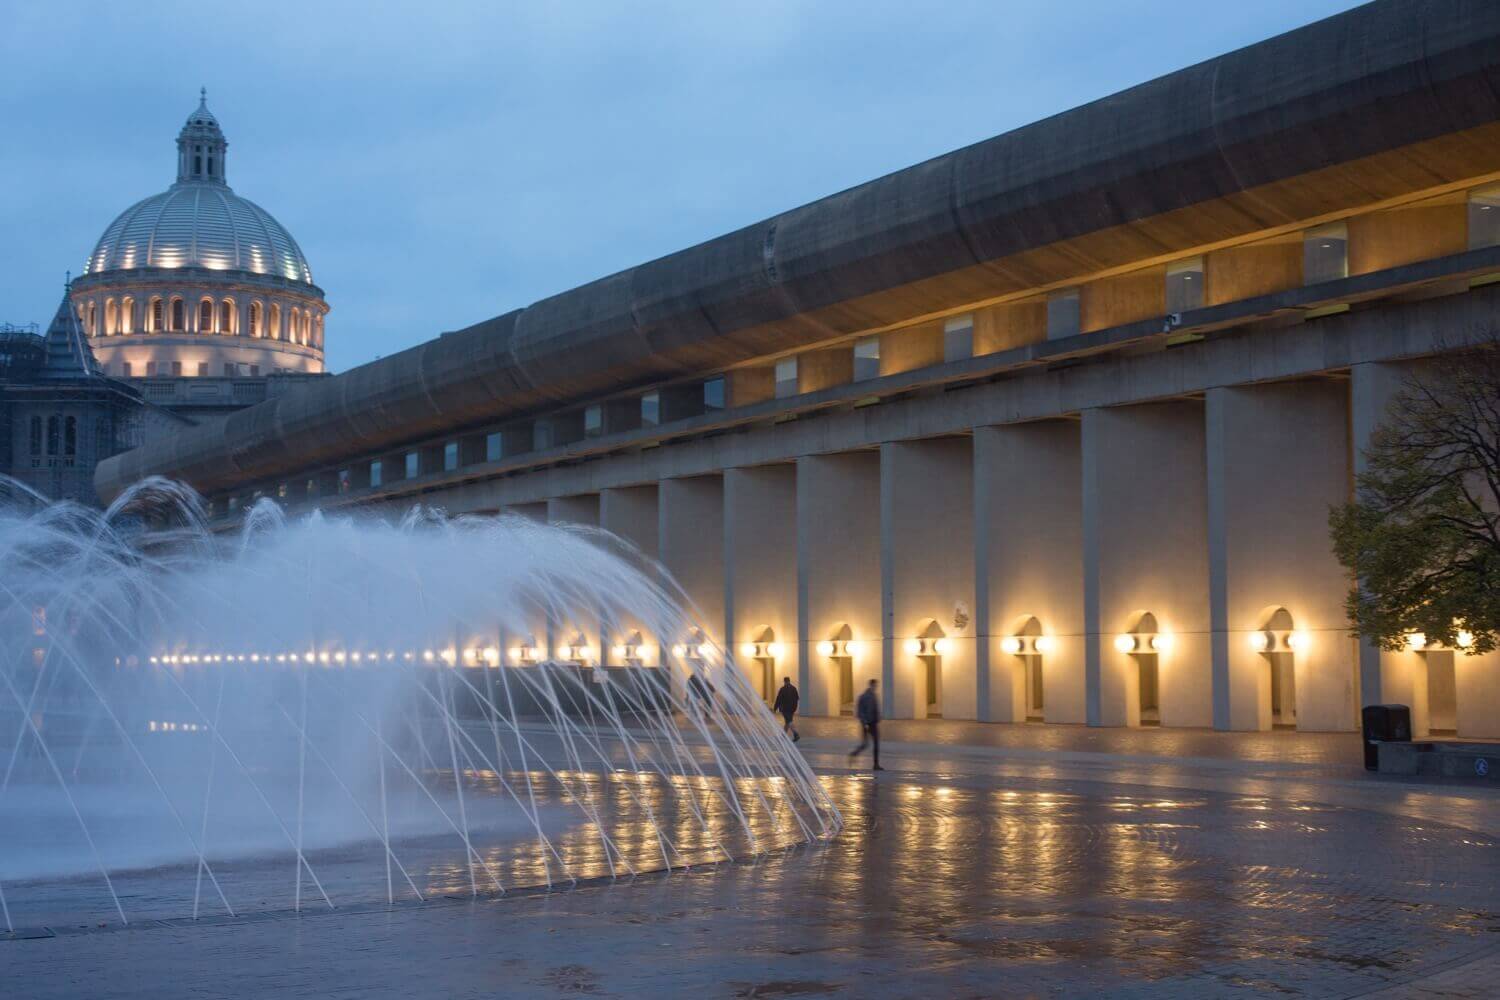 Take a Walk by the Stunning Christian Science Center- Just 2 Minutes away slide image